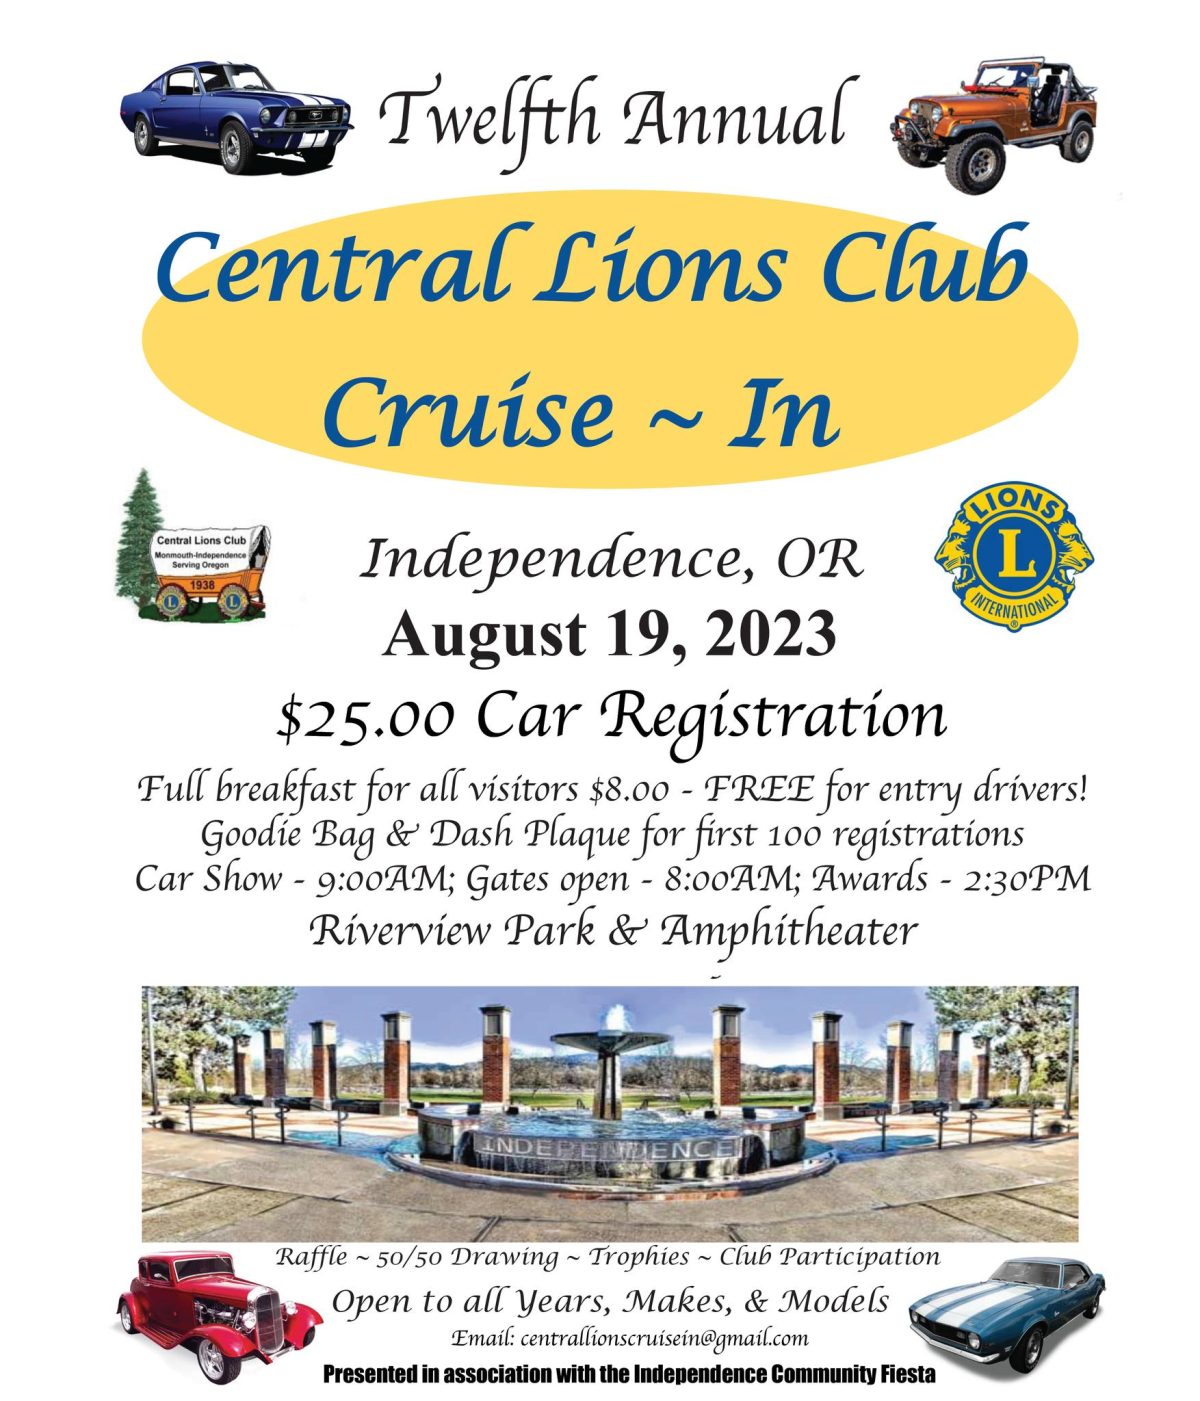 12th Annual Central Lions Club Cruise-In